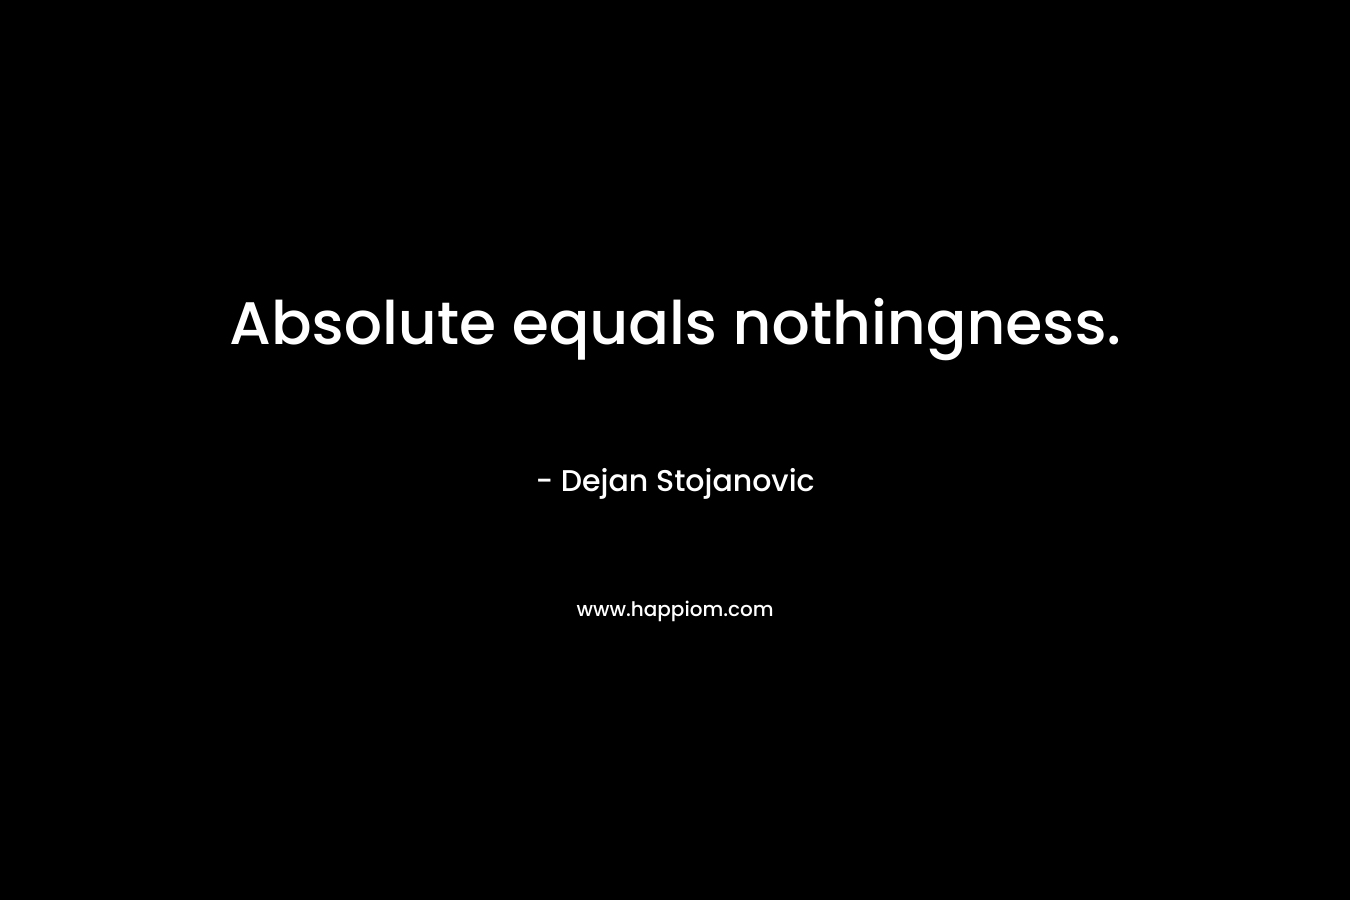 Absolute equals nothingness.